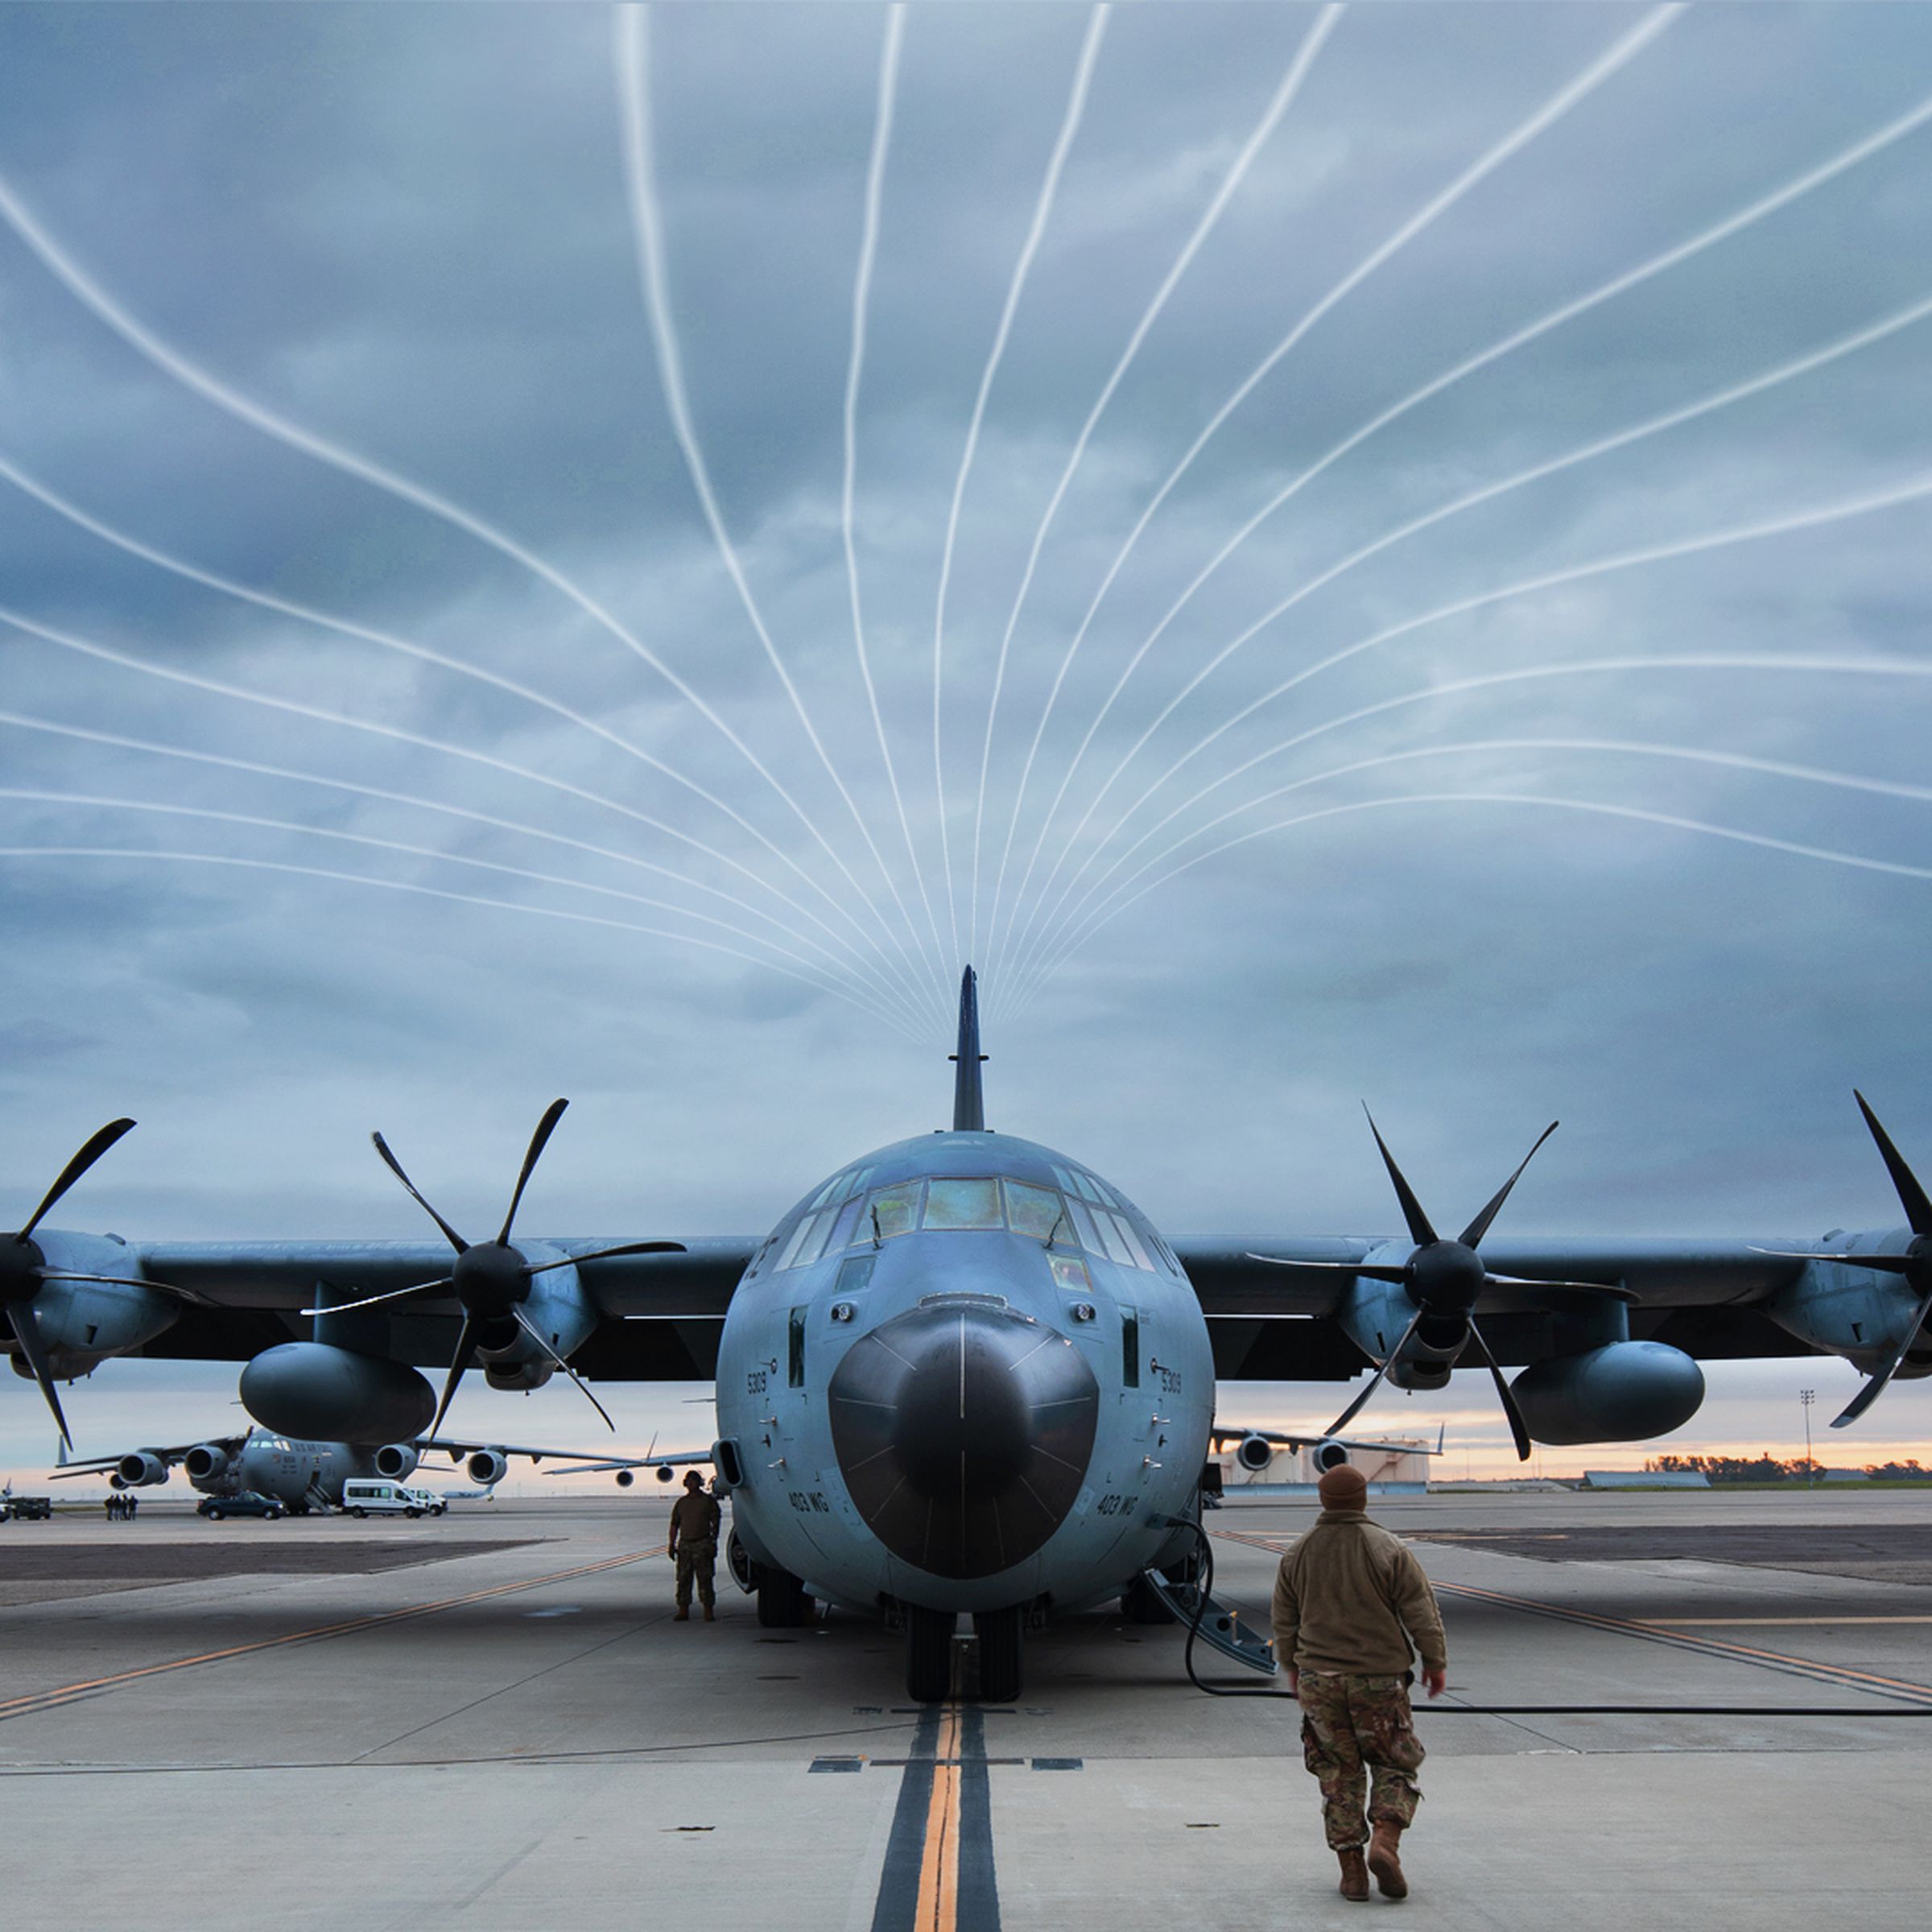 Air Force C130 plane on tarmac, with illustrated “atmospheric river” lines in the sky